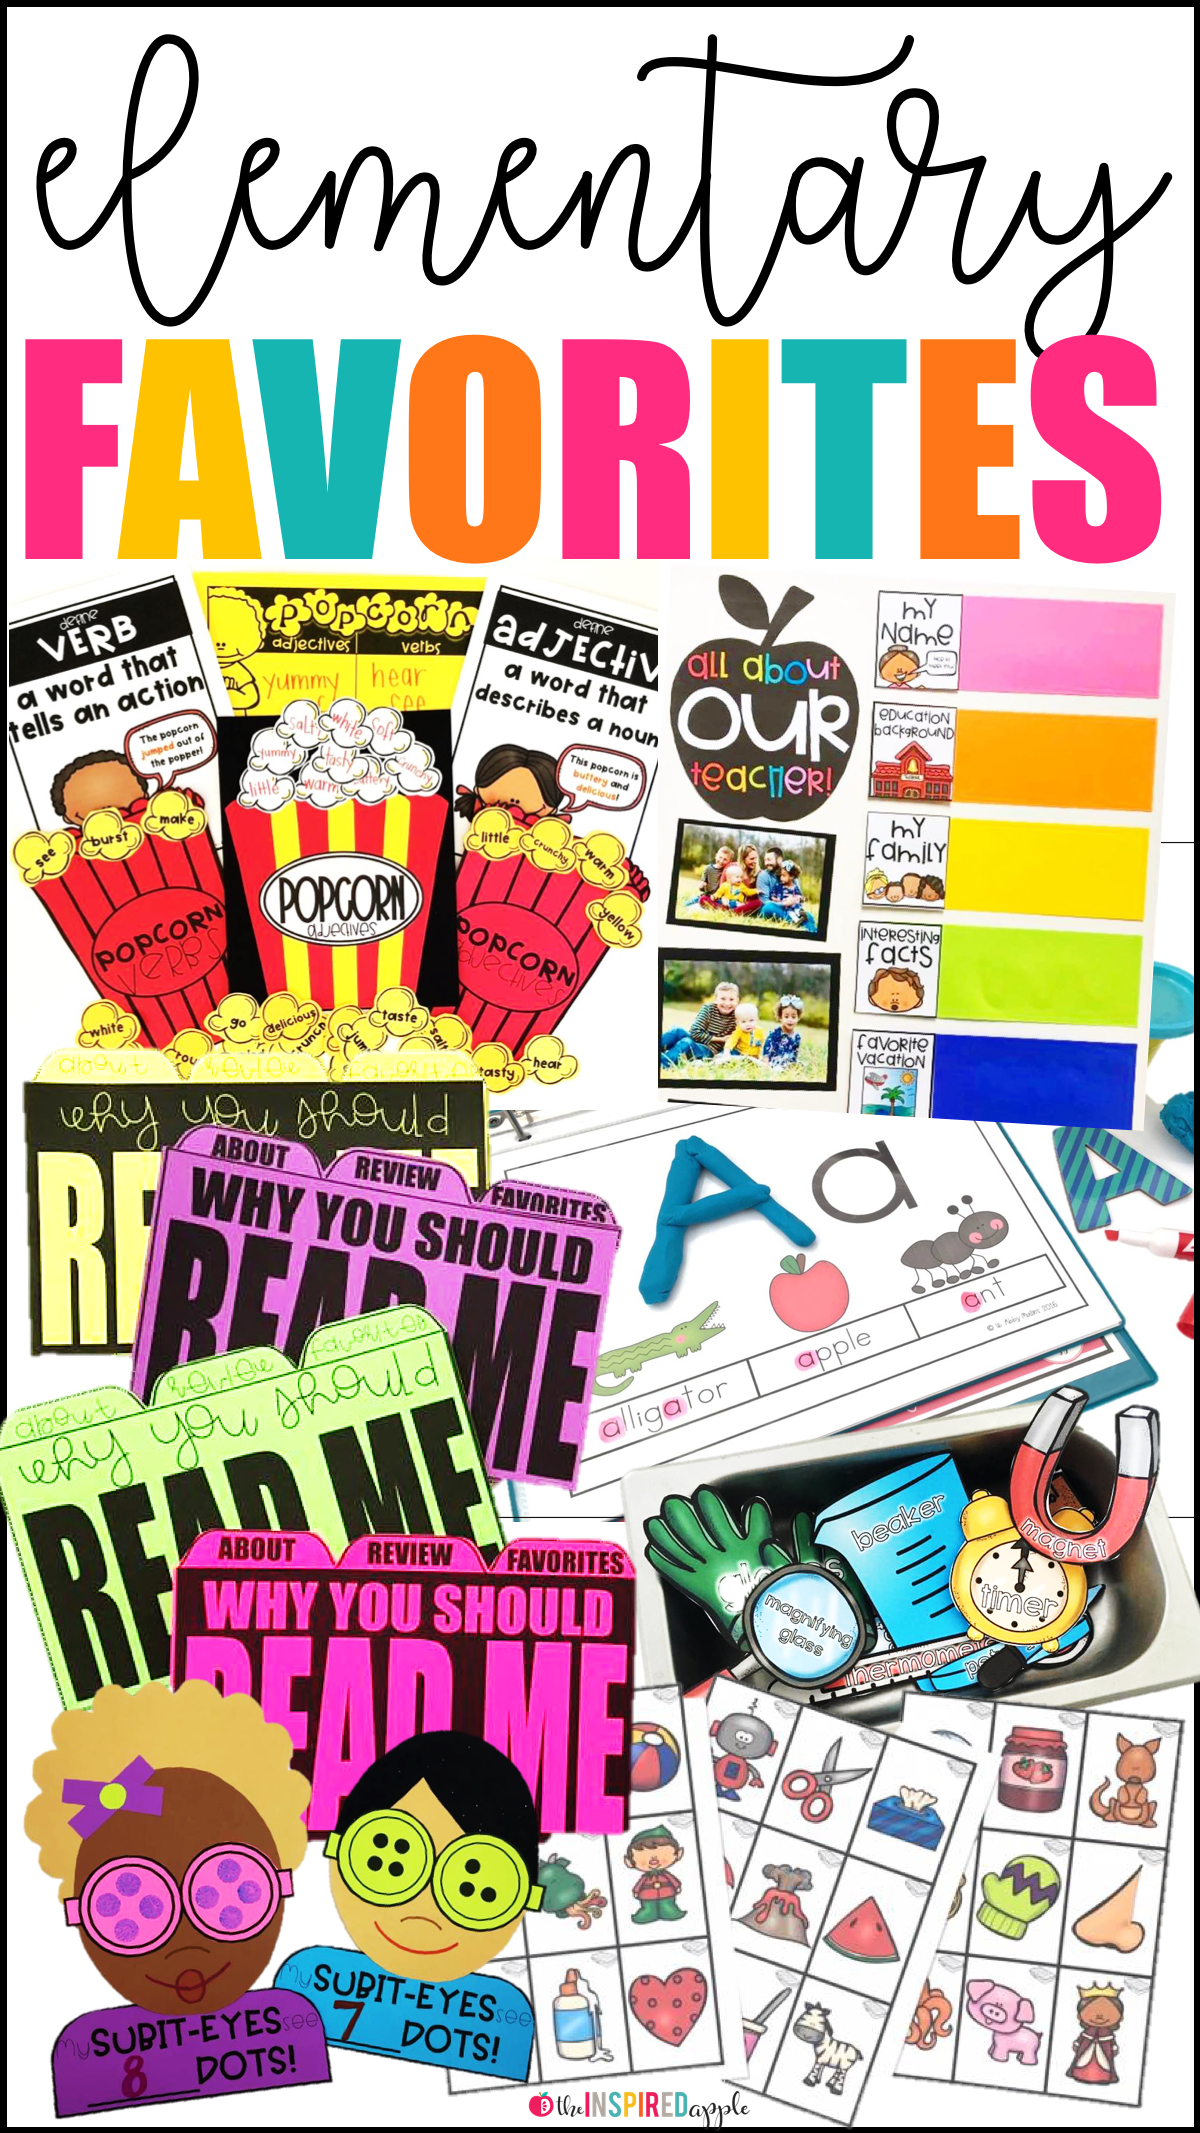 Check out some of the best resources for kindergarten, first grade, and second grade! They're perfect for the first day of school, the back to school season, or any time of year! Each activity is engaging, fun, and will help you effectively deliver content to your students. From teaching adjectives to celebrating reading to meet the teacher to making friends to learning number sense with crafts, this post has it all!